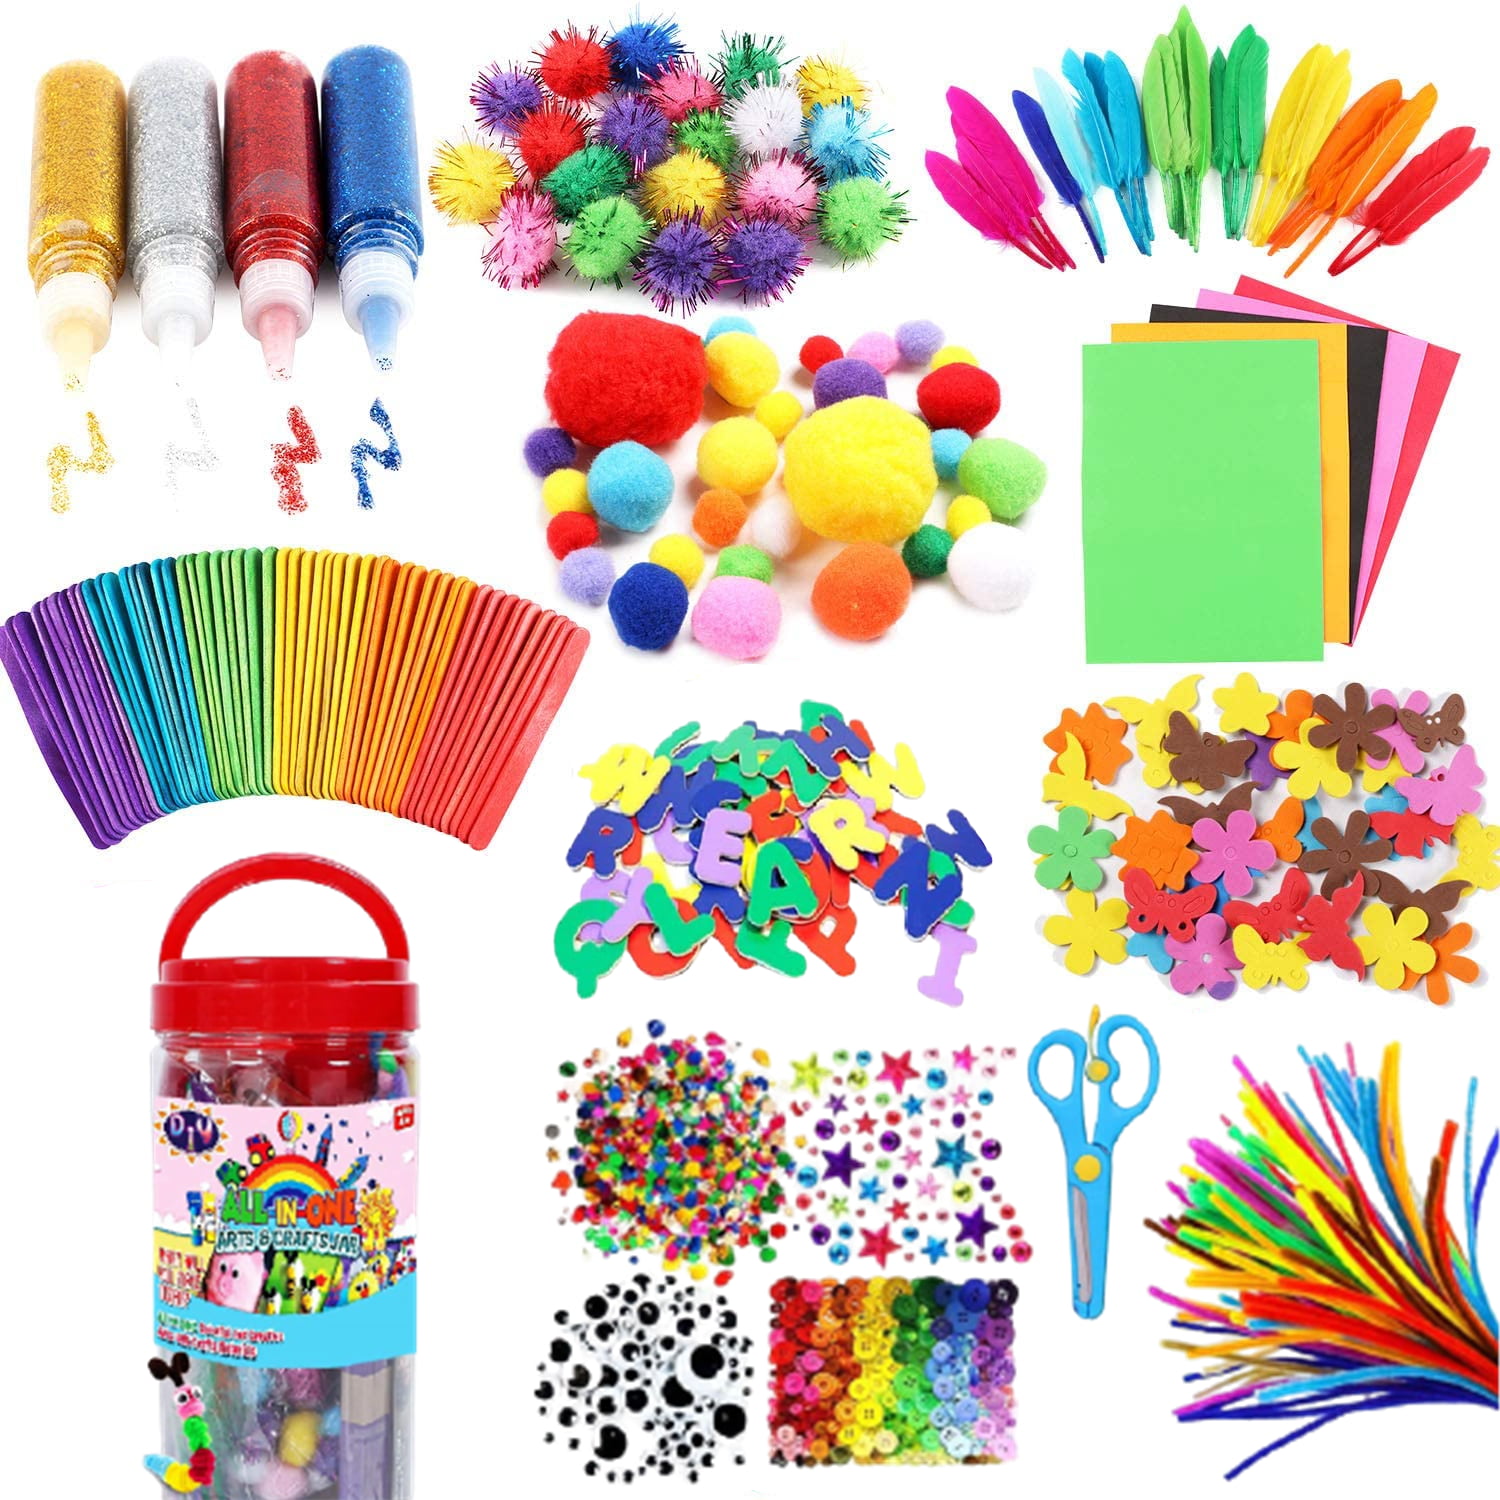 50 Wiggle Googly Eyes IKUKUER Pipe Cleaners,DIY Art Crafts Set Include 300 Pipe Cleaners,100 Glitter Craft Chenille Stems 50 Mascara Eyes,50 Colored Eyes 150 Multicolor Pom Poms 